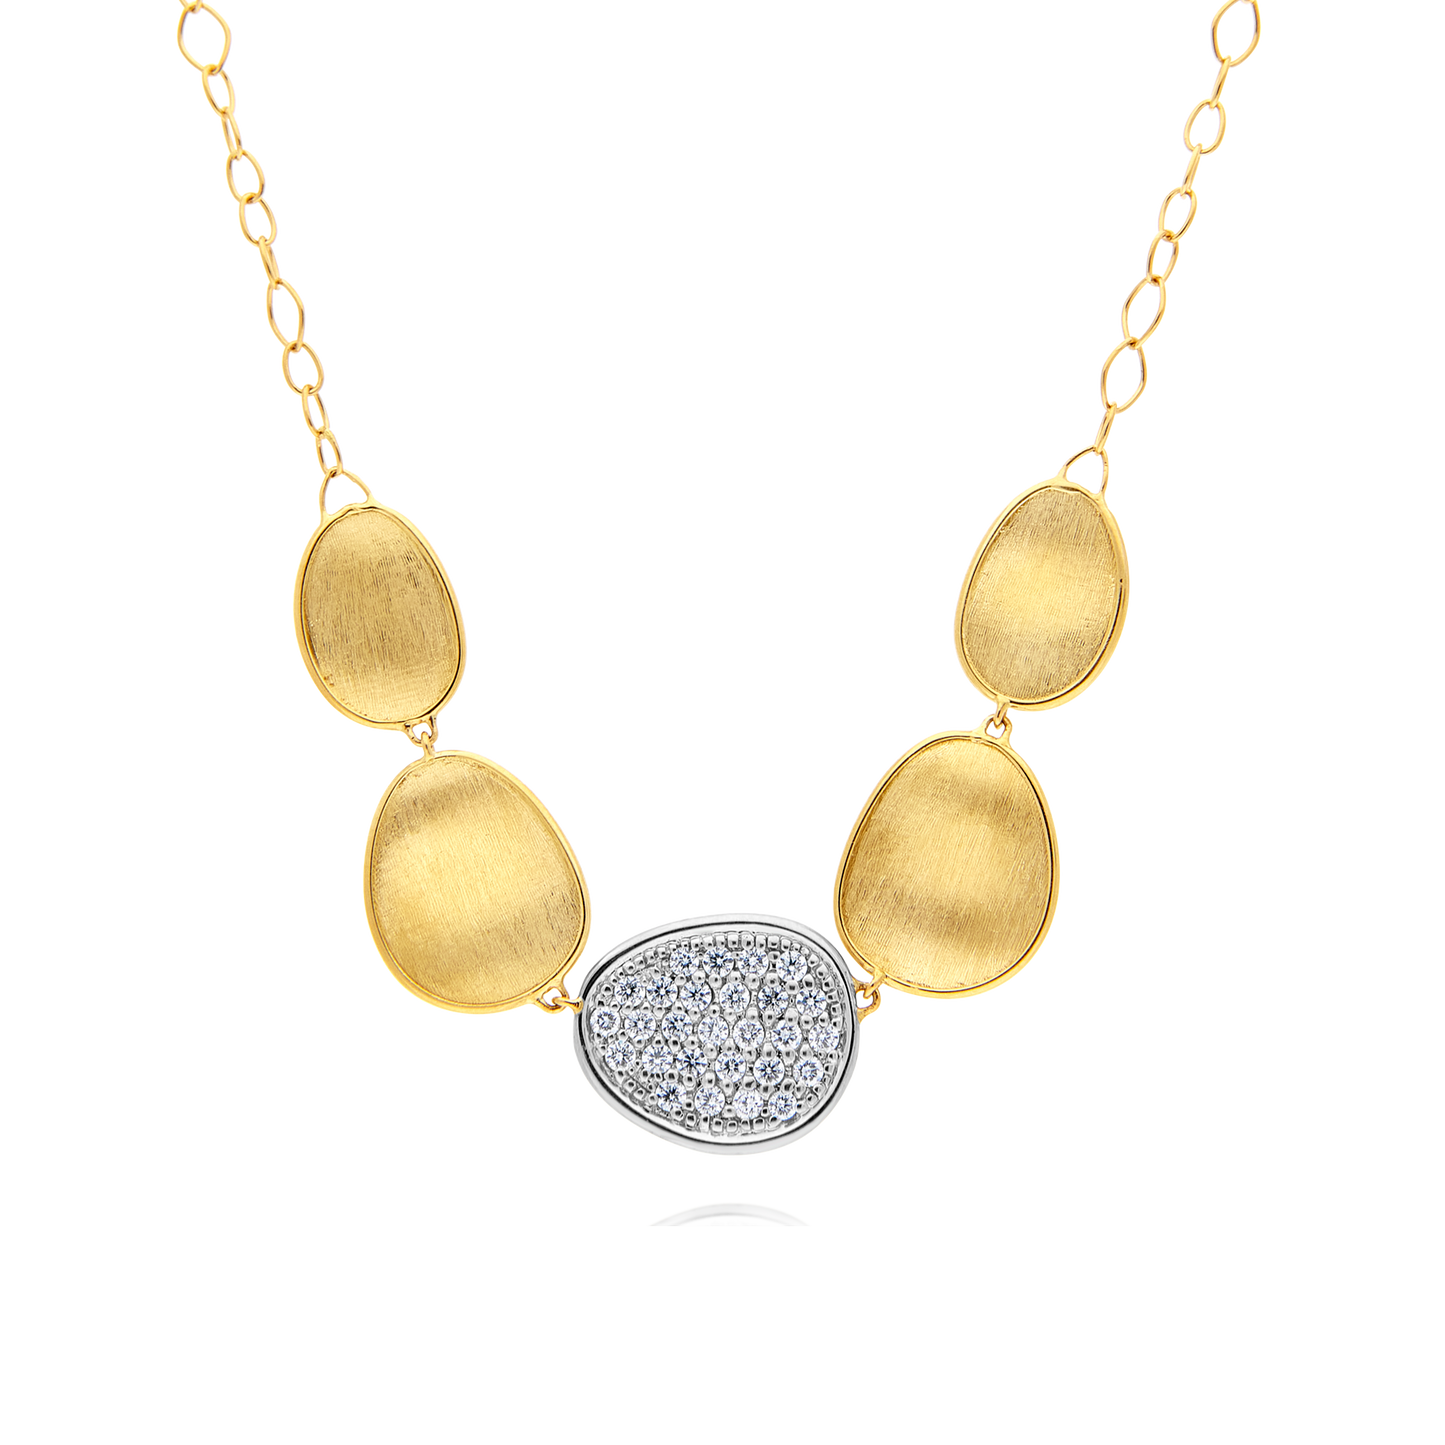 18ct Gold and Diamond "Lunaria" Necklace Marco Bicego